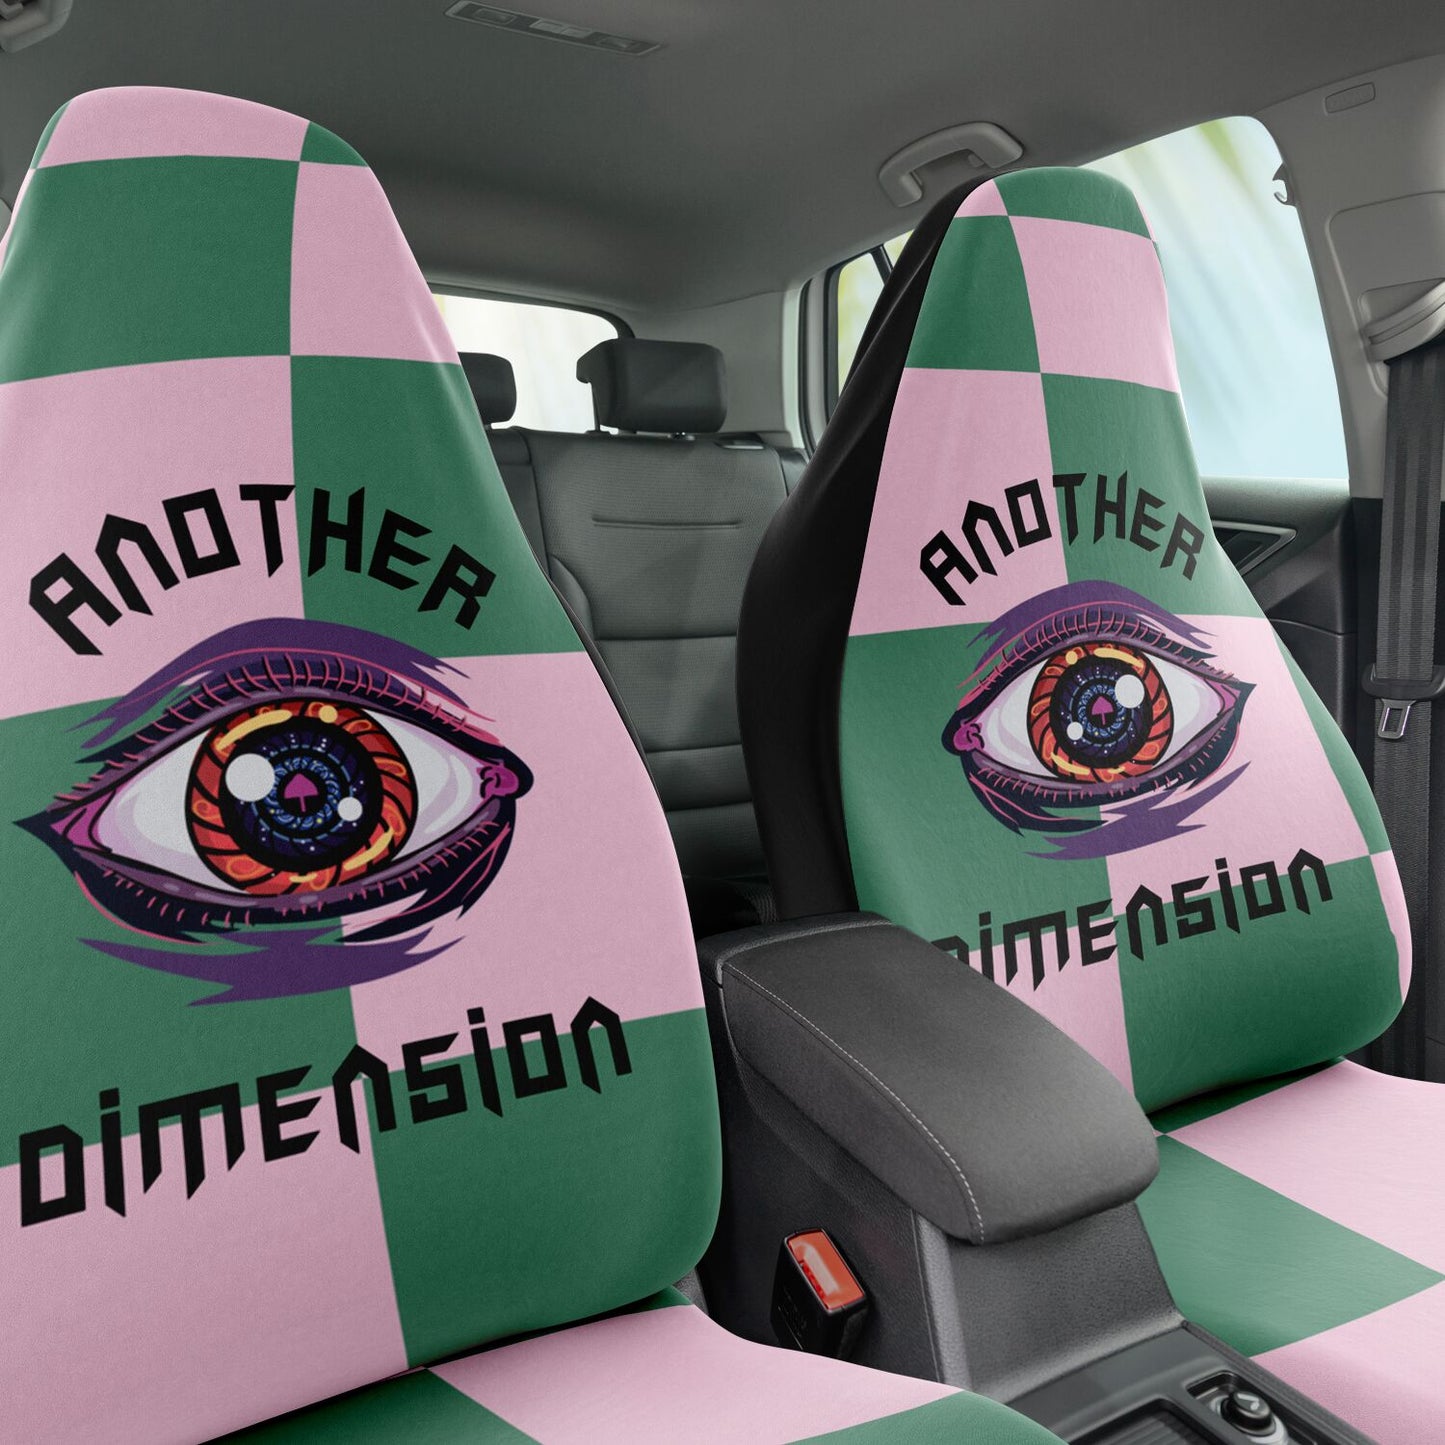 ANOTHER DIMENSION - Car Seat Covers